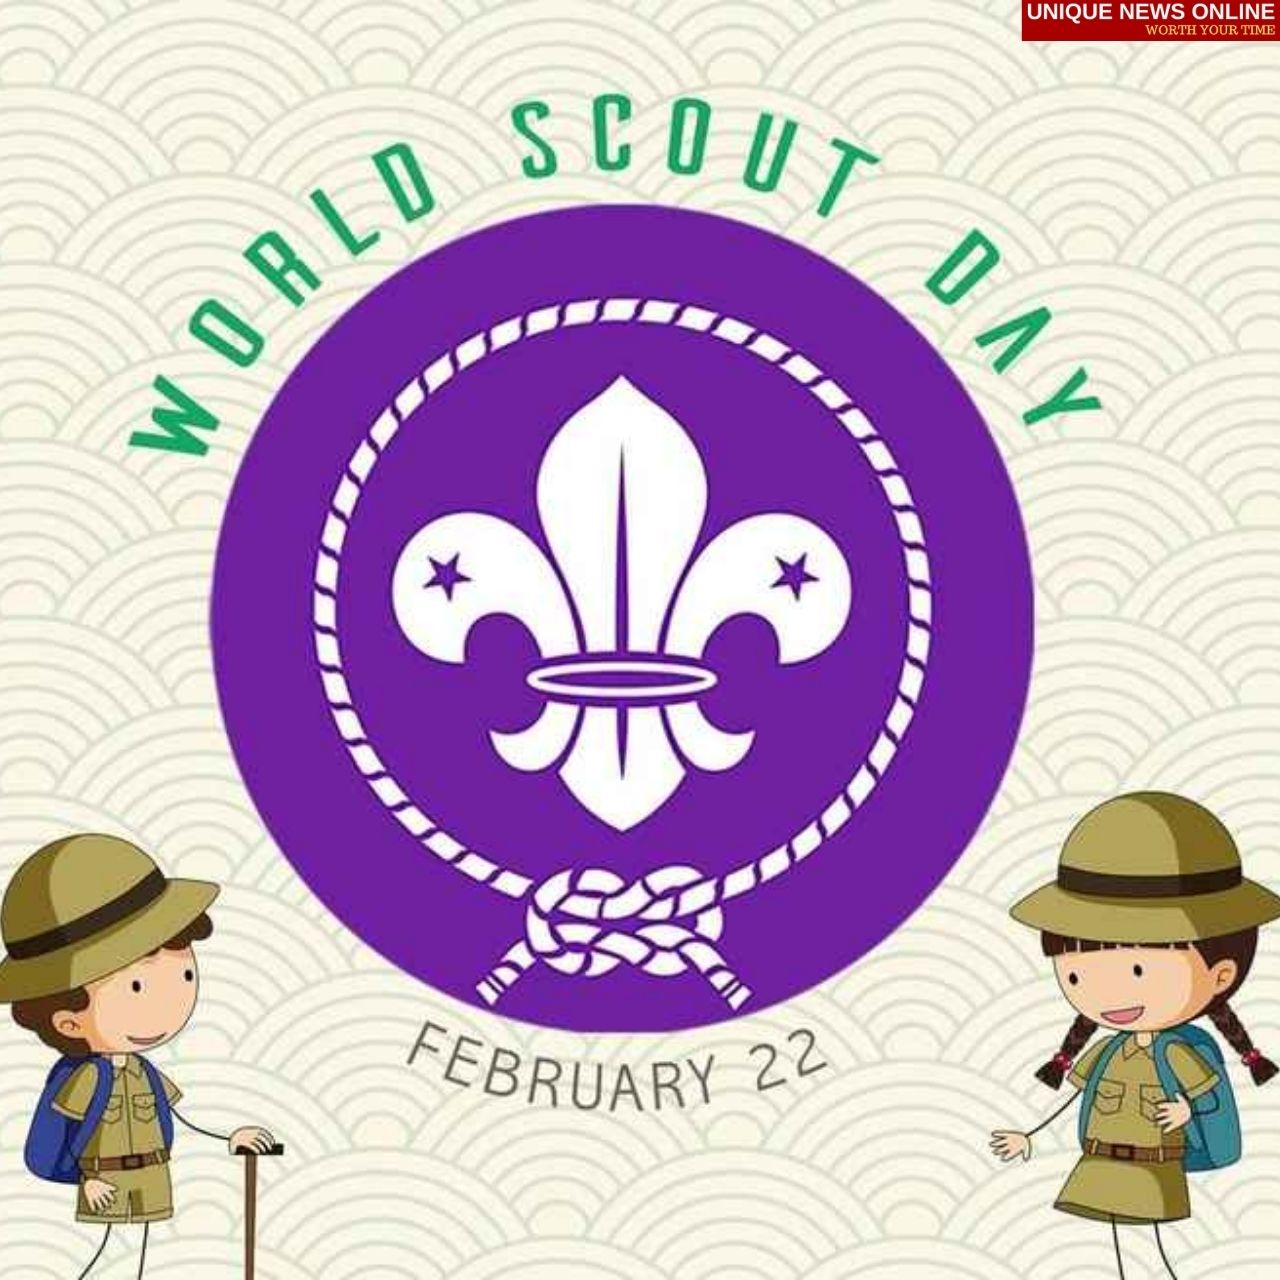 World Scout Day 2022 Quotes, HD Images, Messages, Posters, Banners to Share